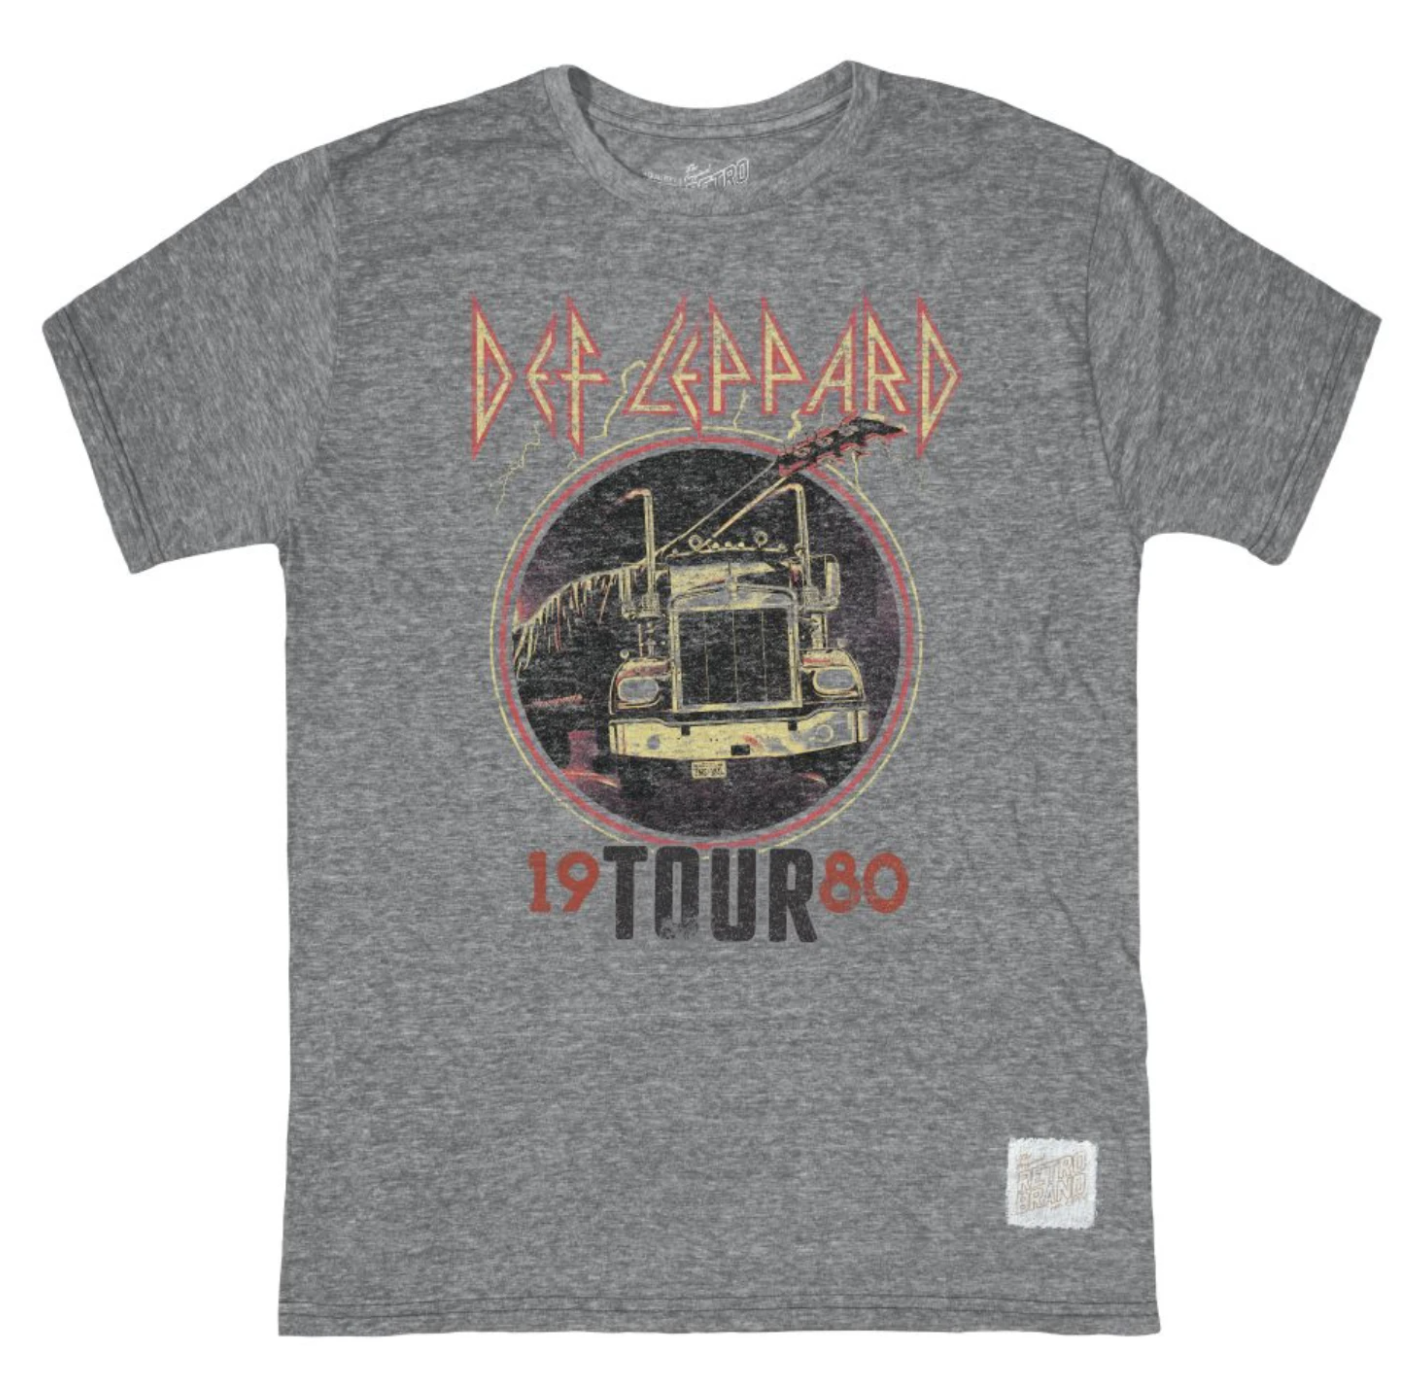 Def Leppard 1980 Tour logo featuring rock and roll rig on our short sleeve tri-blend unisex tee in streaky gray.